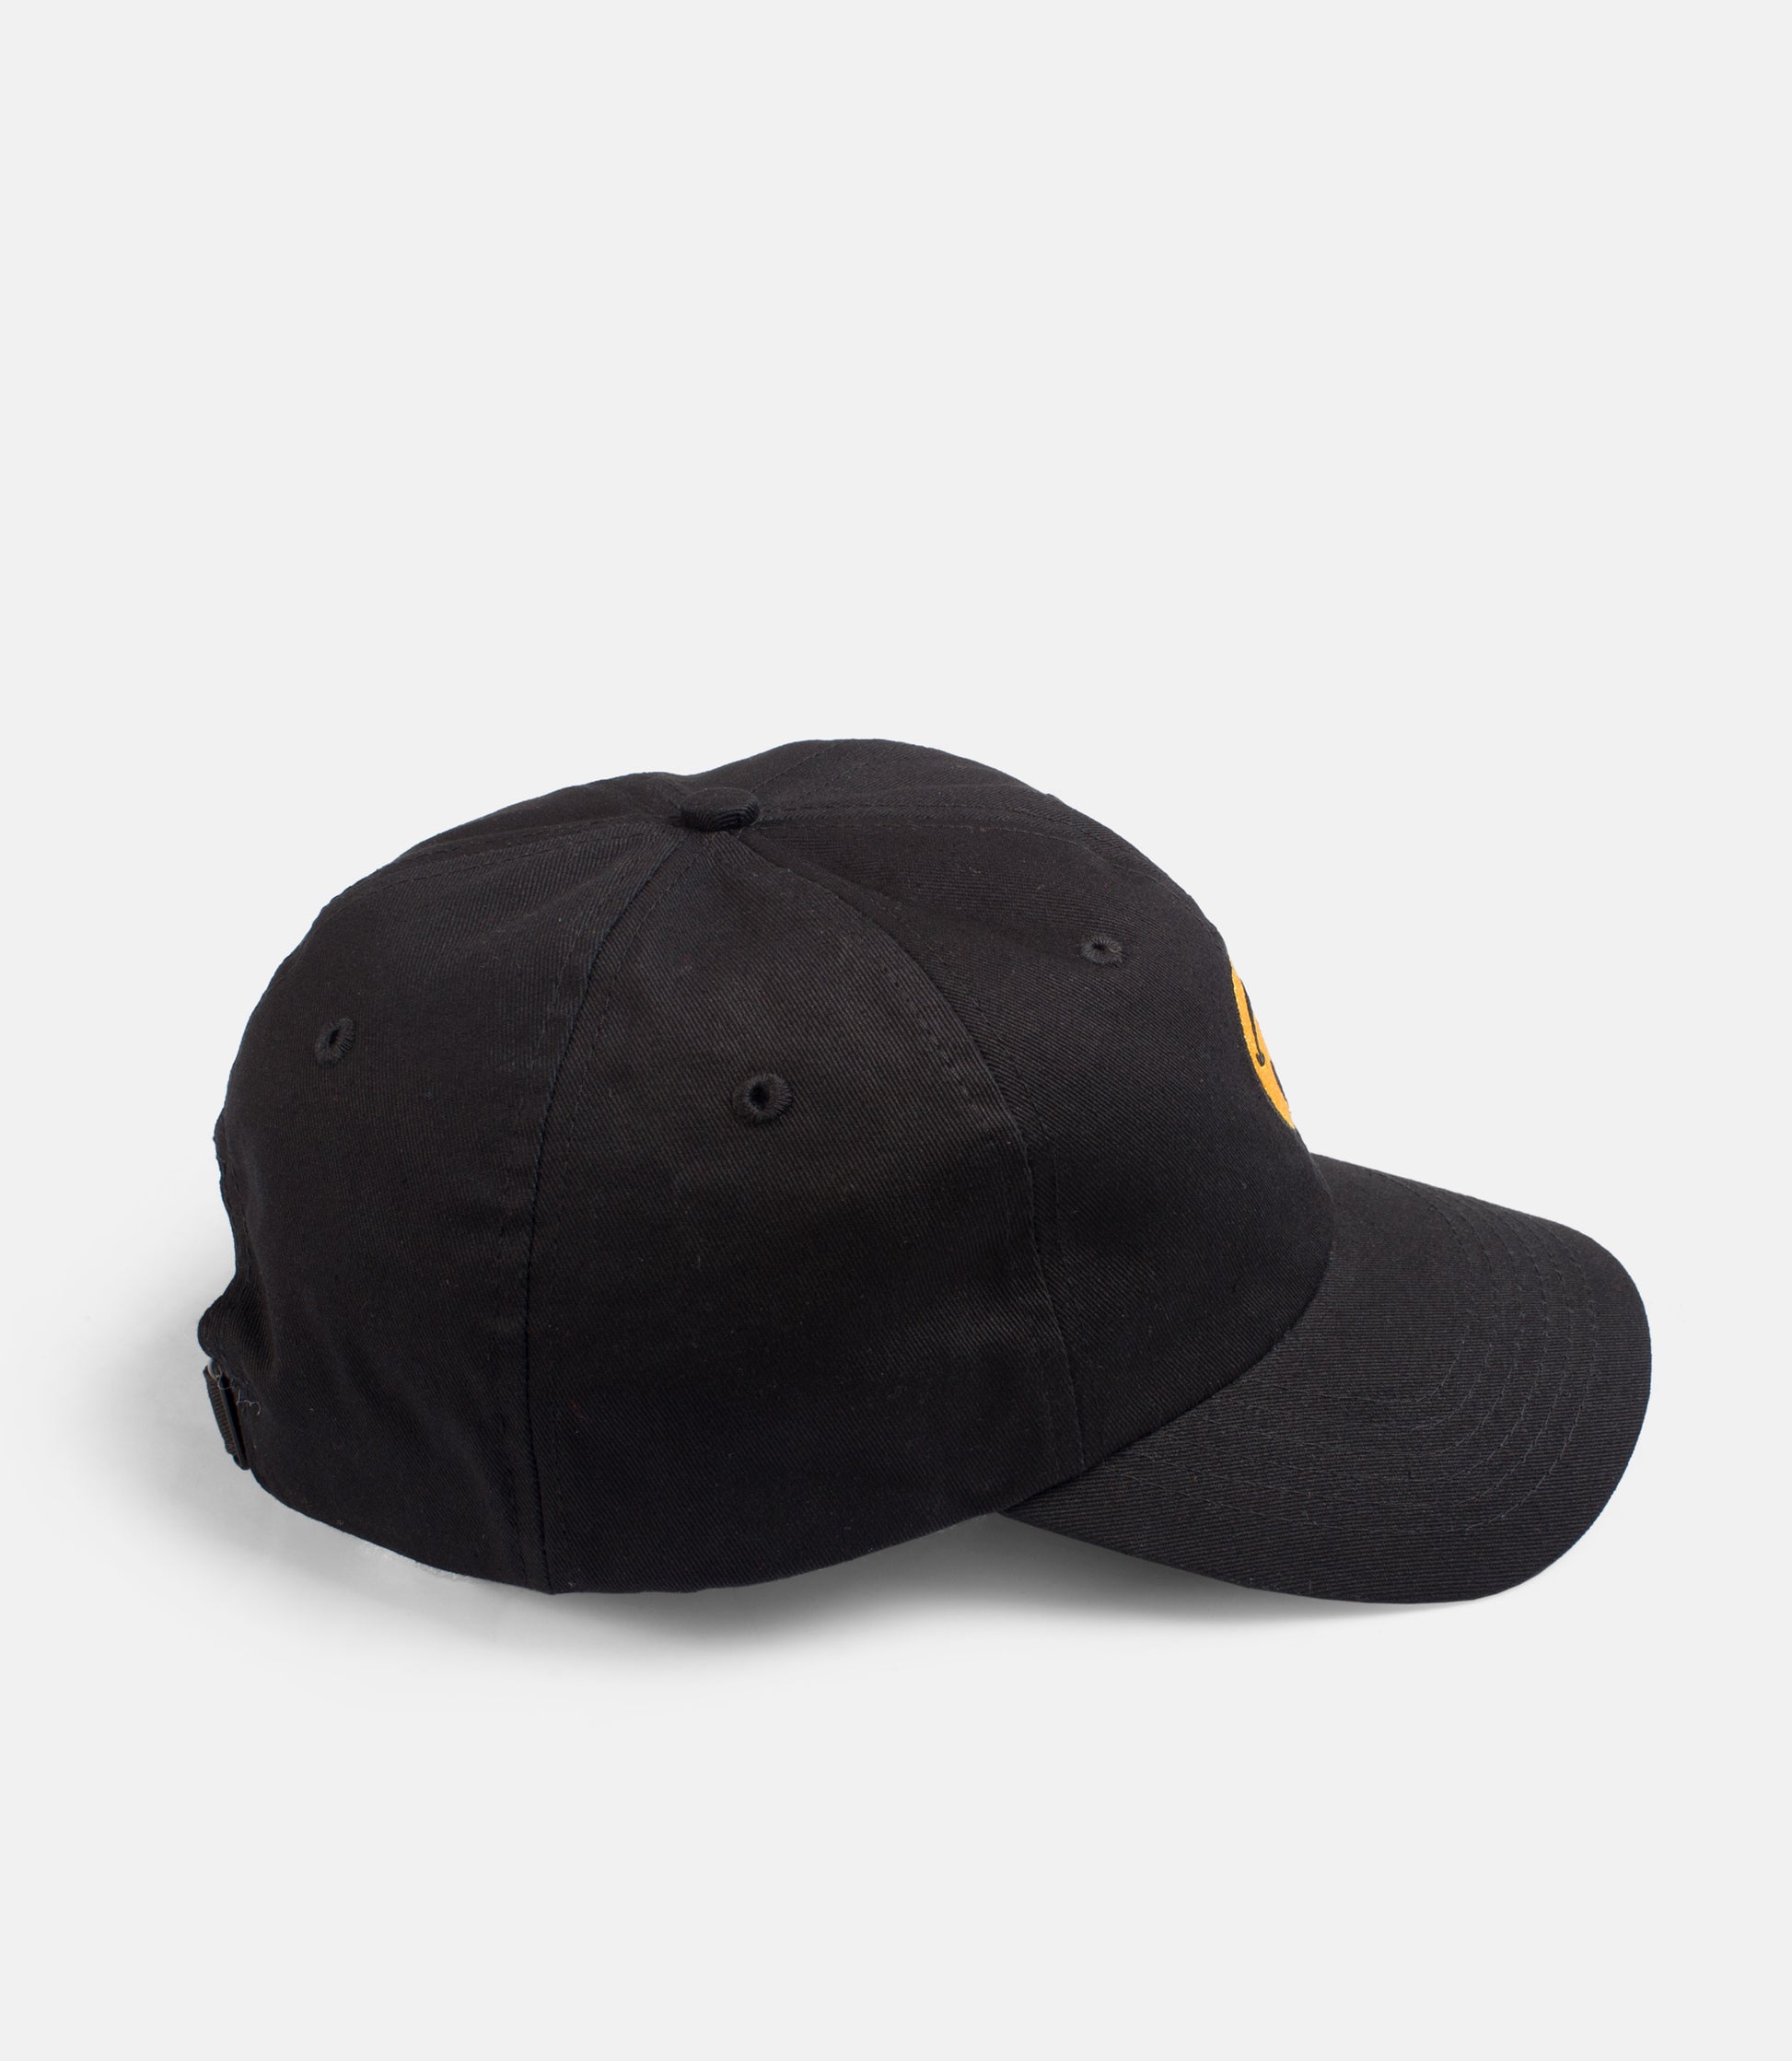 10Deep - All Is Well Dad Hat, Black - The Giant Peach